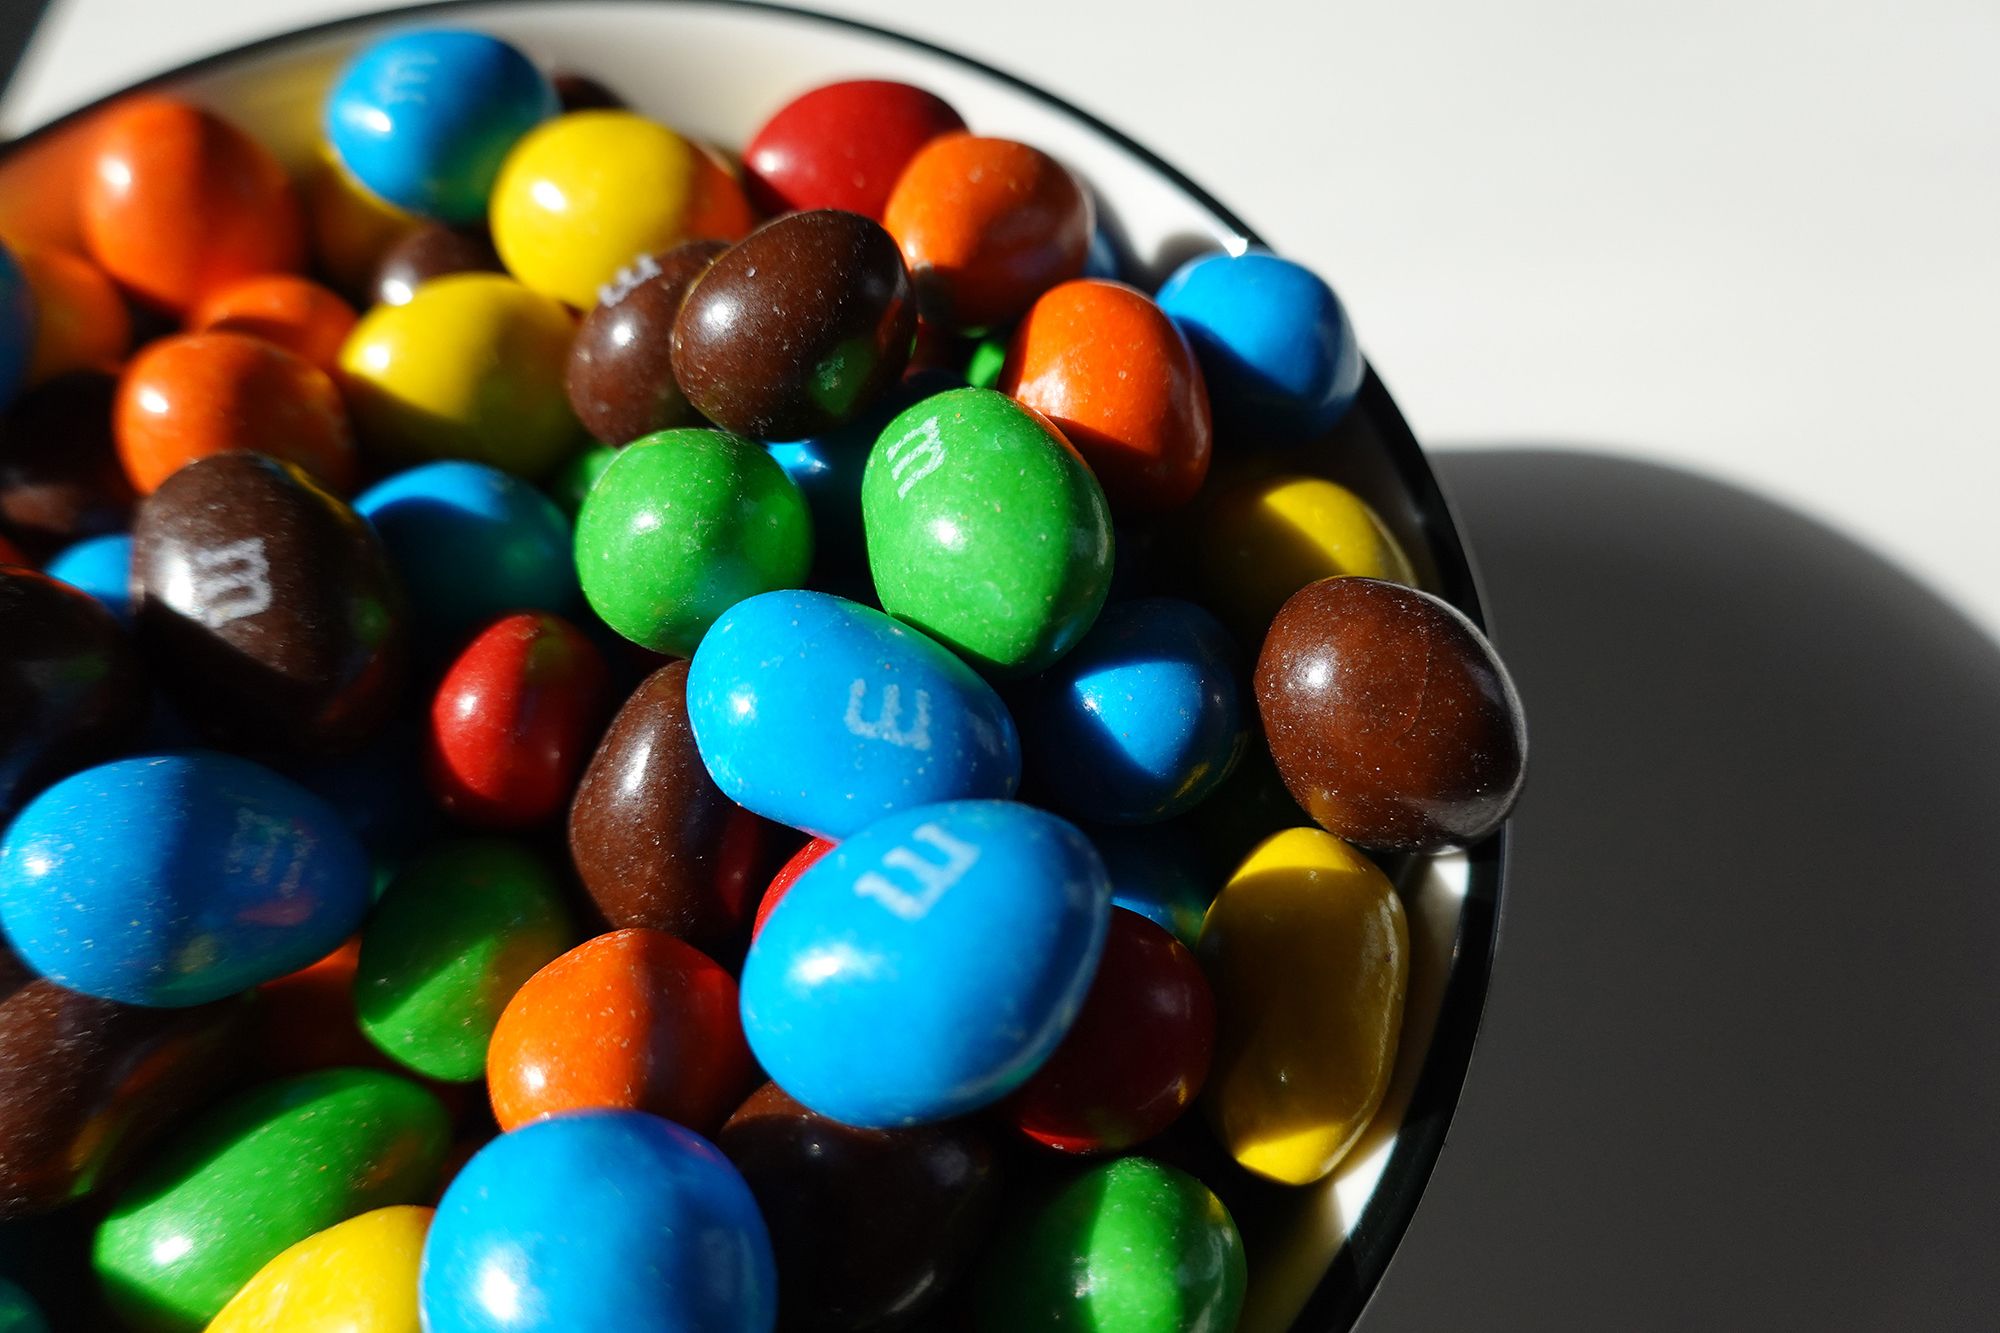 M&M's Ditches Spokescandies After Backlash, Here's Why It Matters